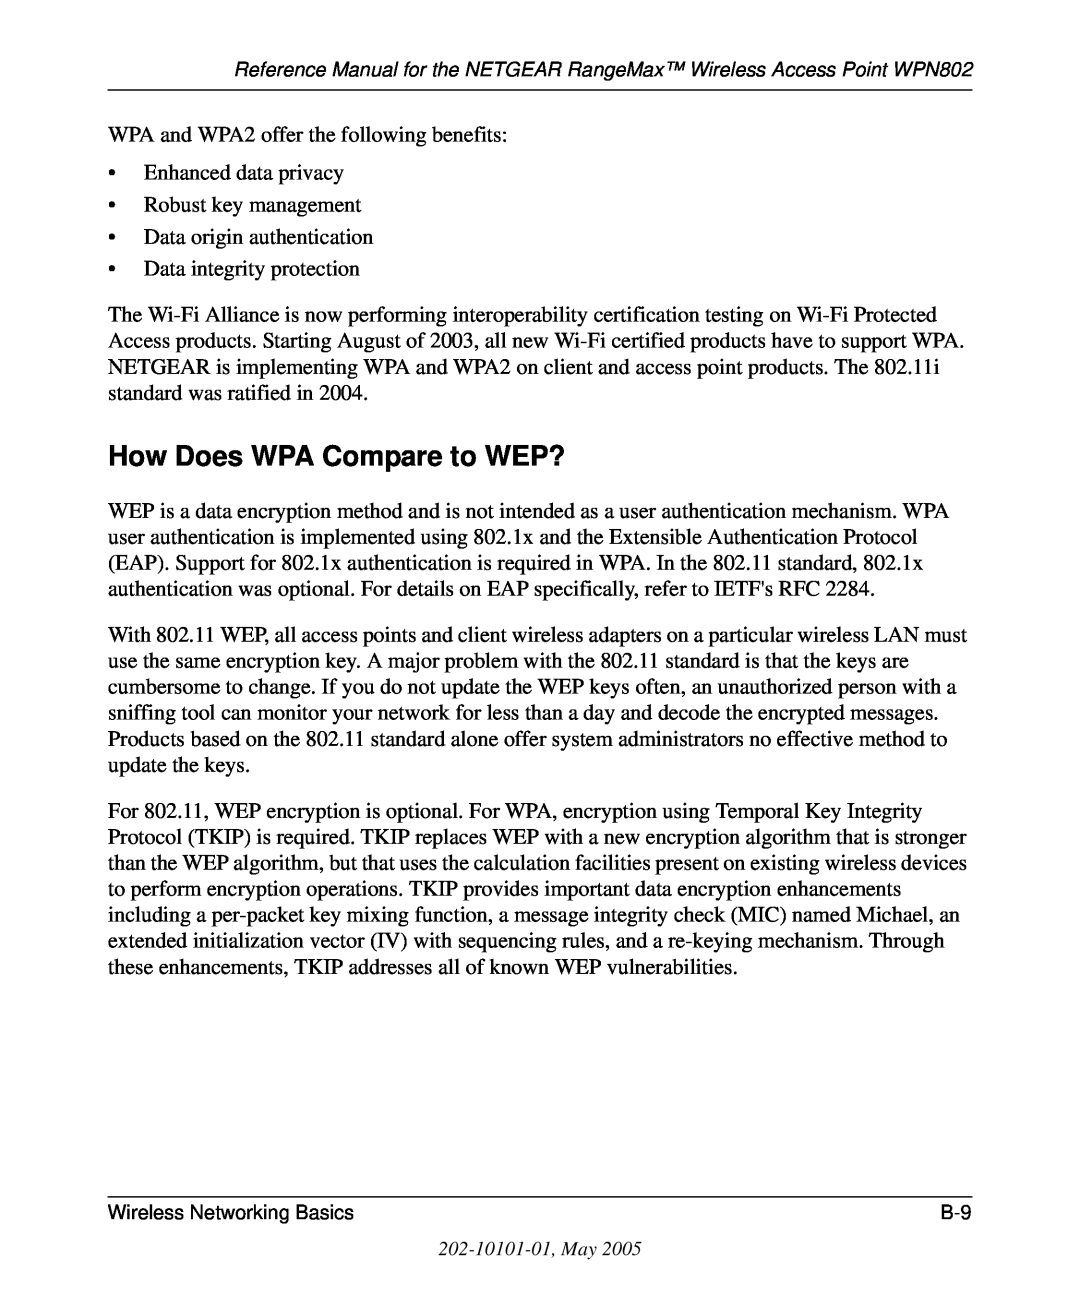 NETGEAR WPN802 manual How Does WPA Compare to WEP? 